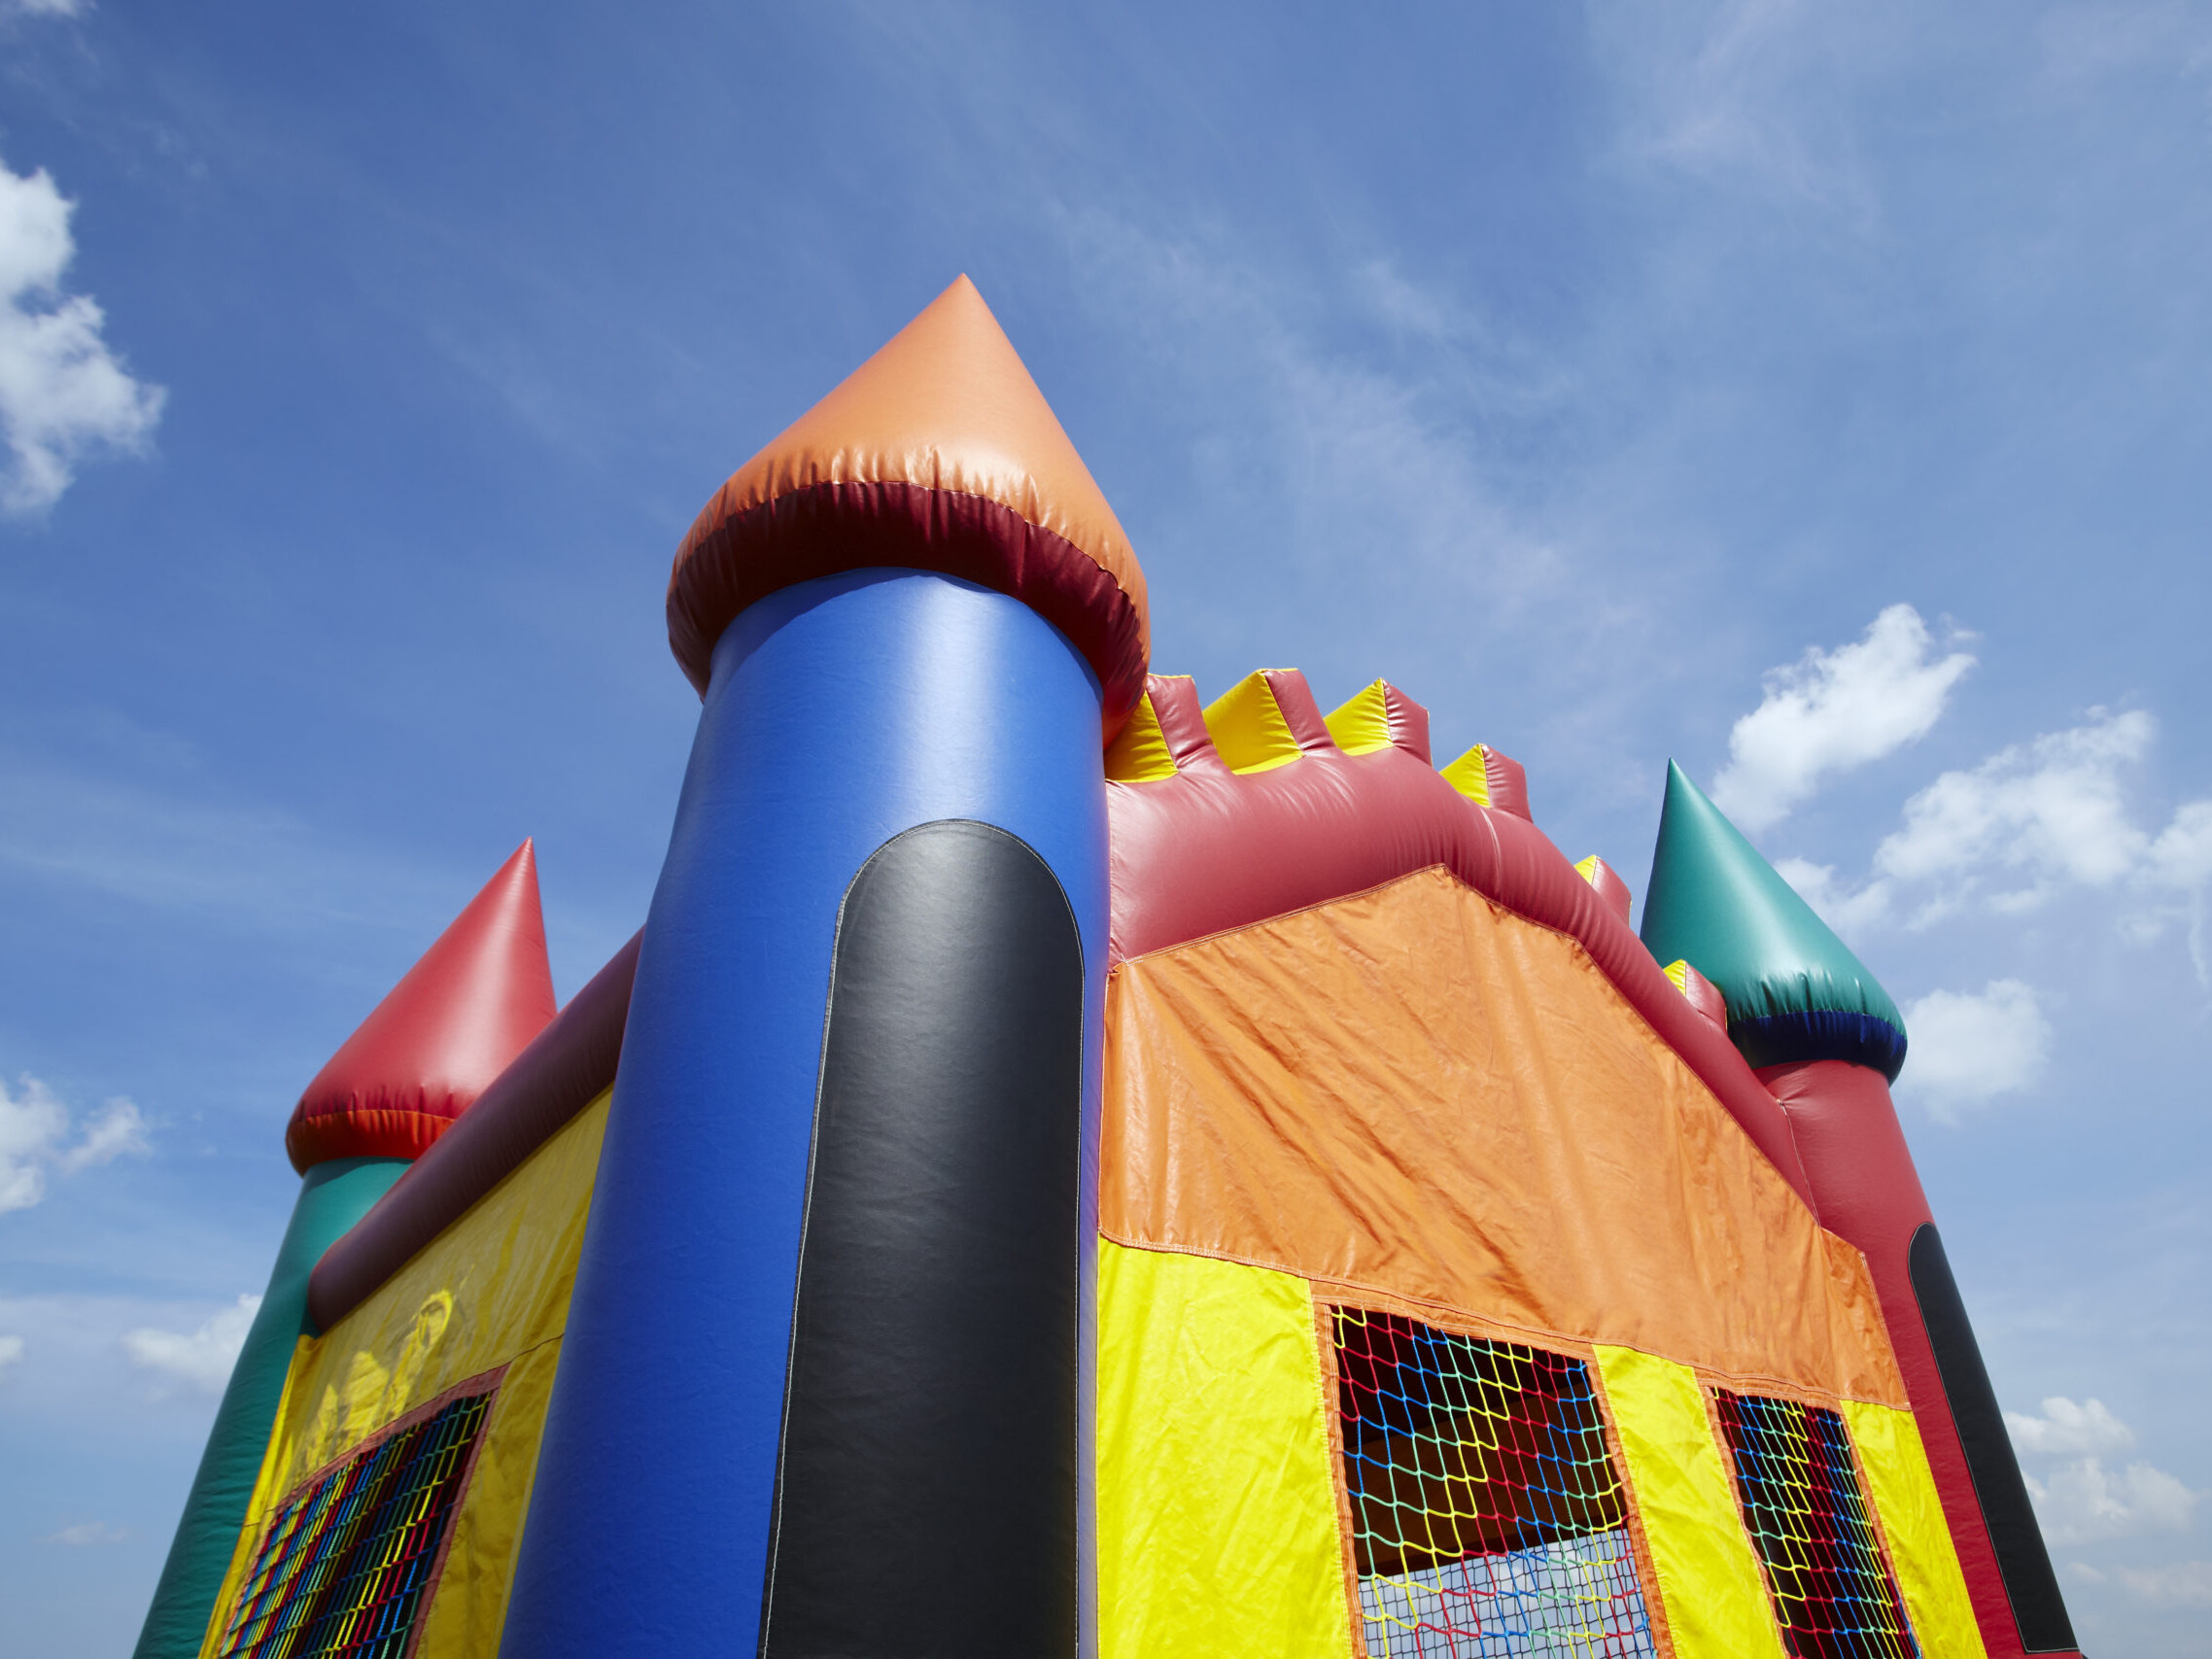 Children's inflatable bouncy castle with a blue sky and clouds.